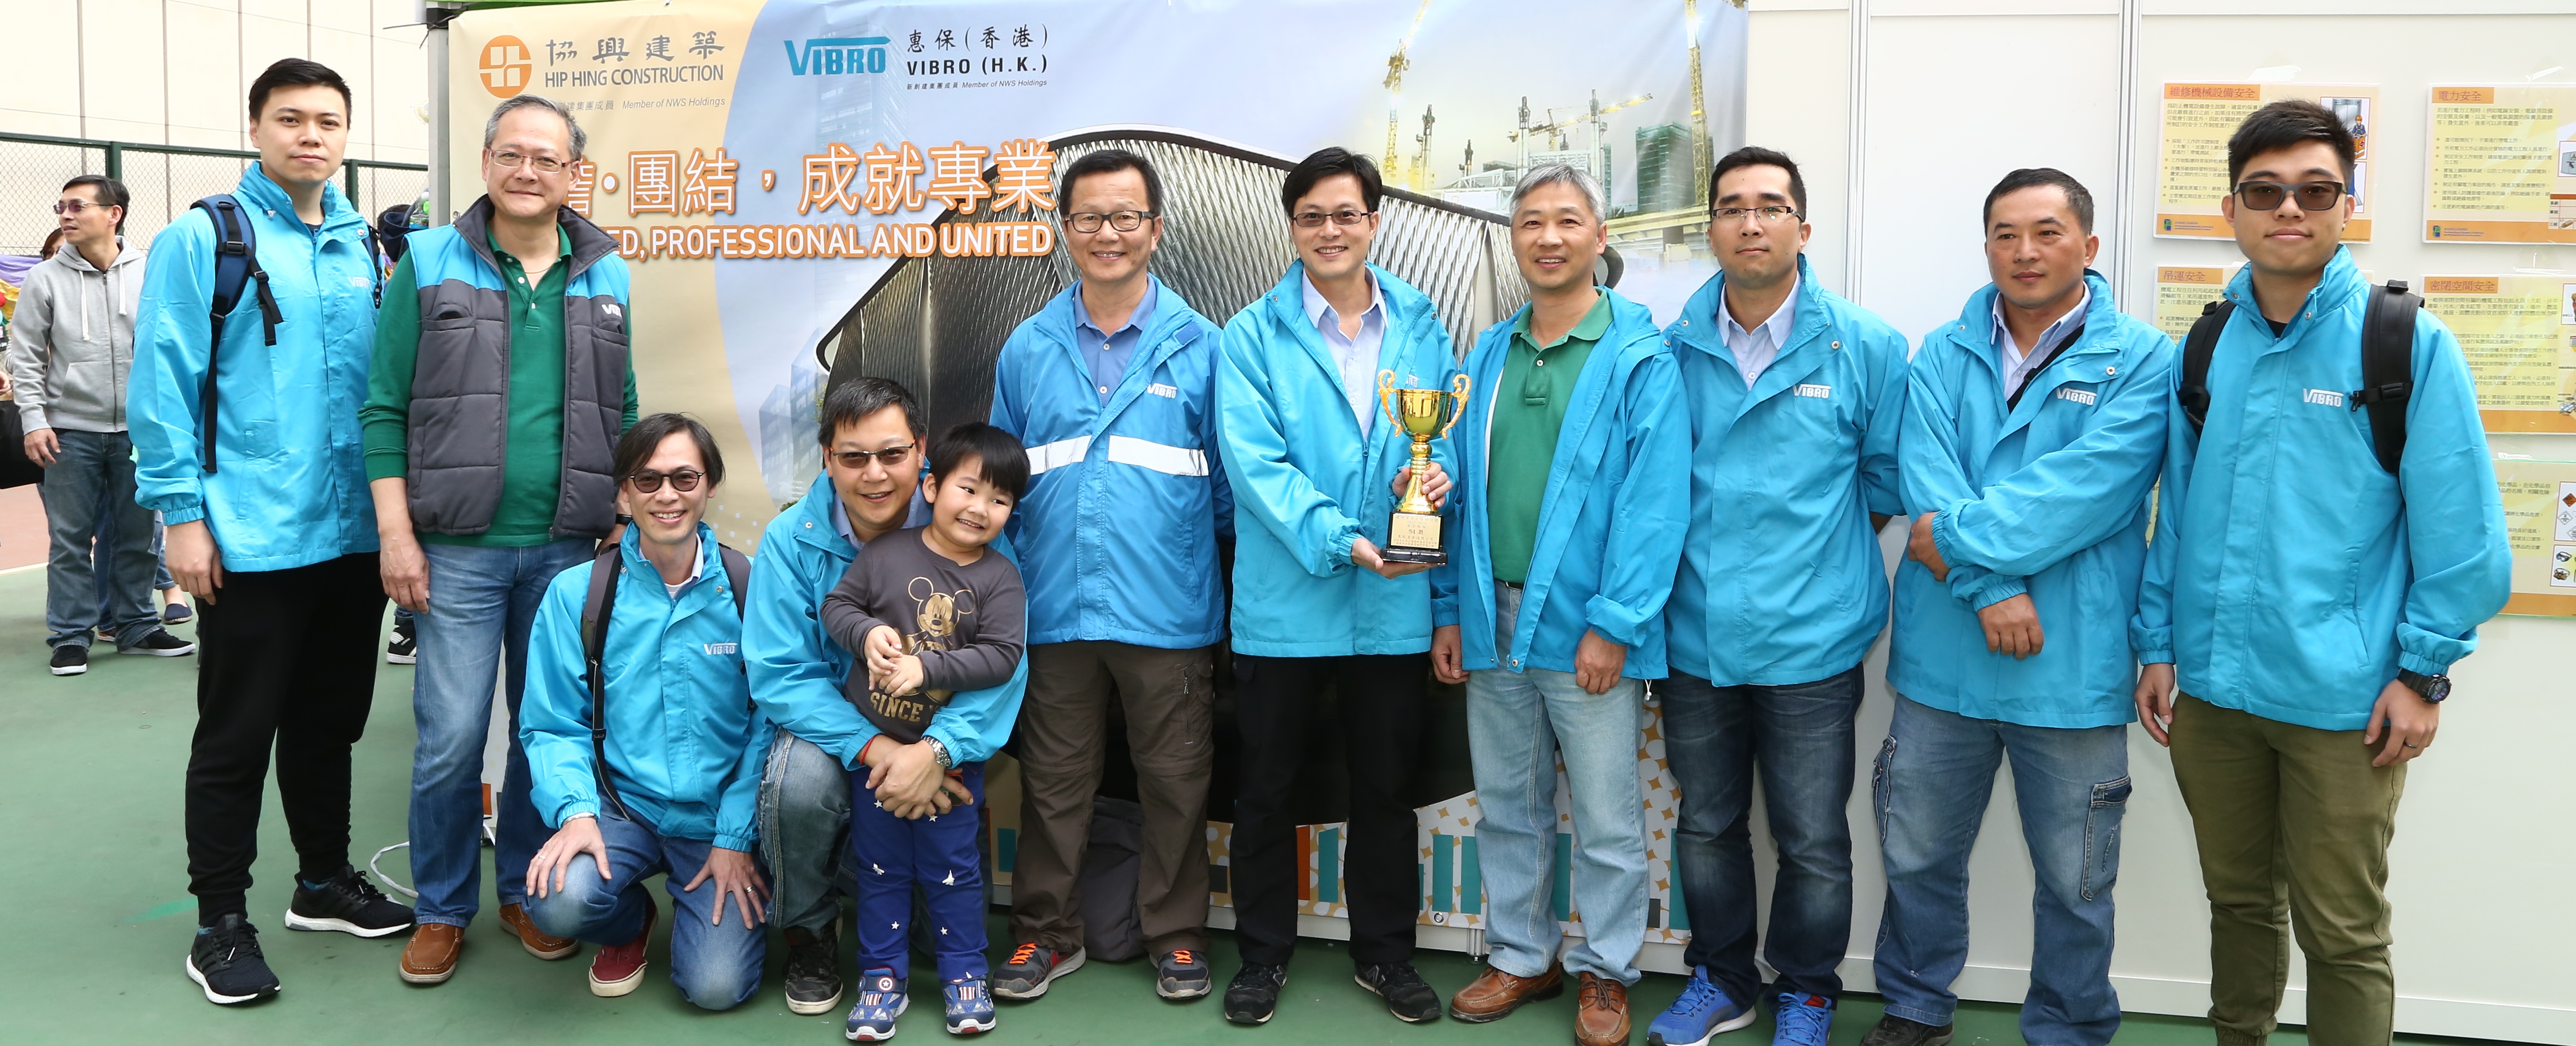 Vibro is committed to implement safe construction measures in its construction sites